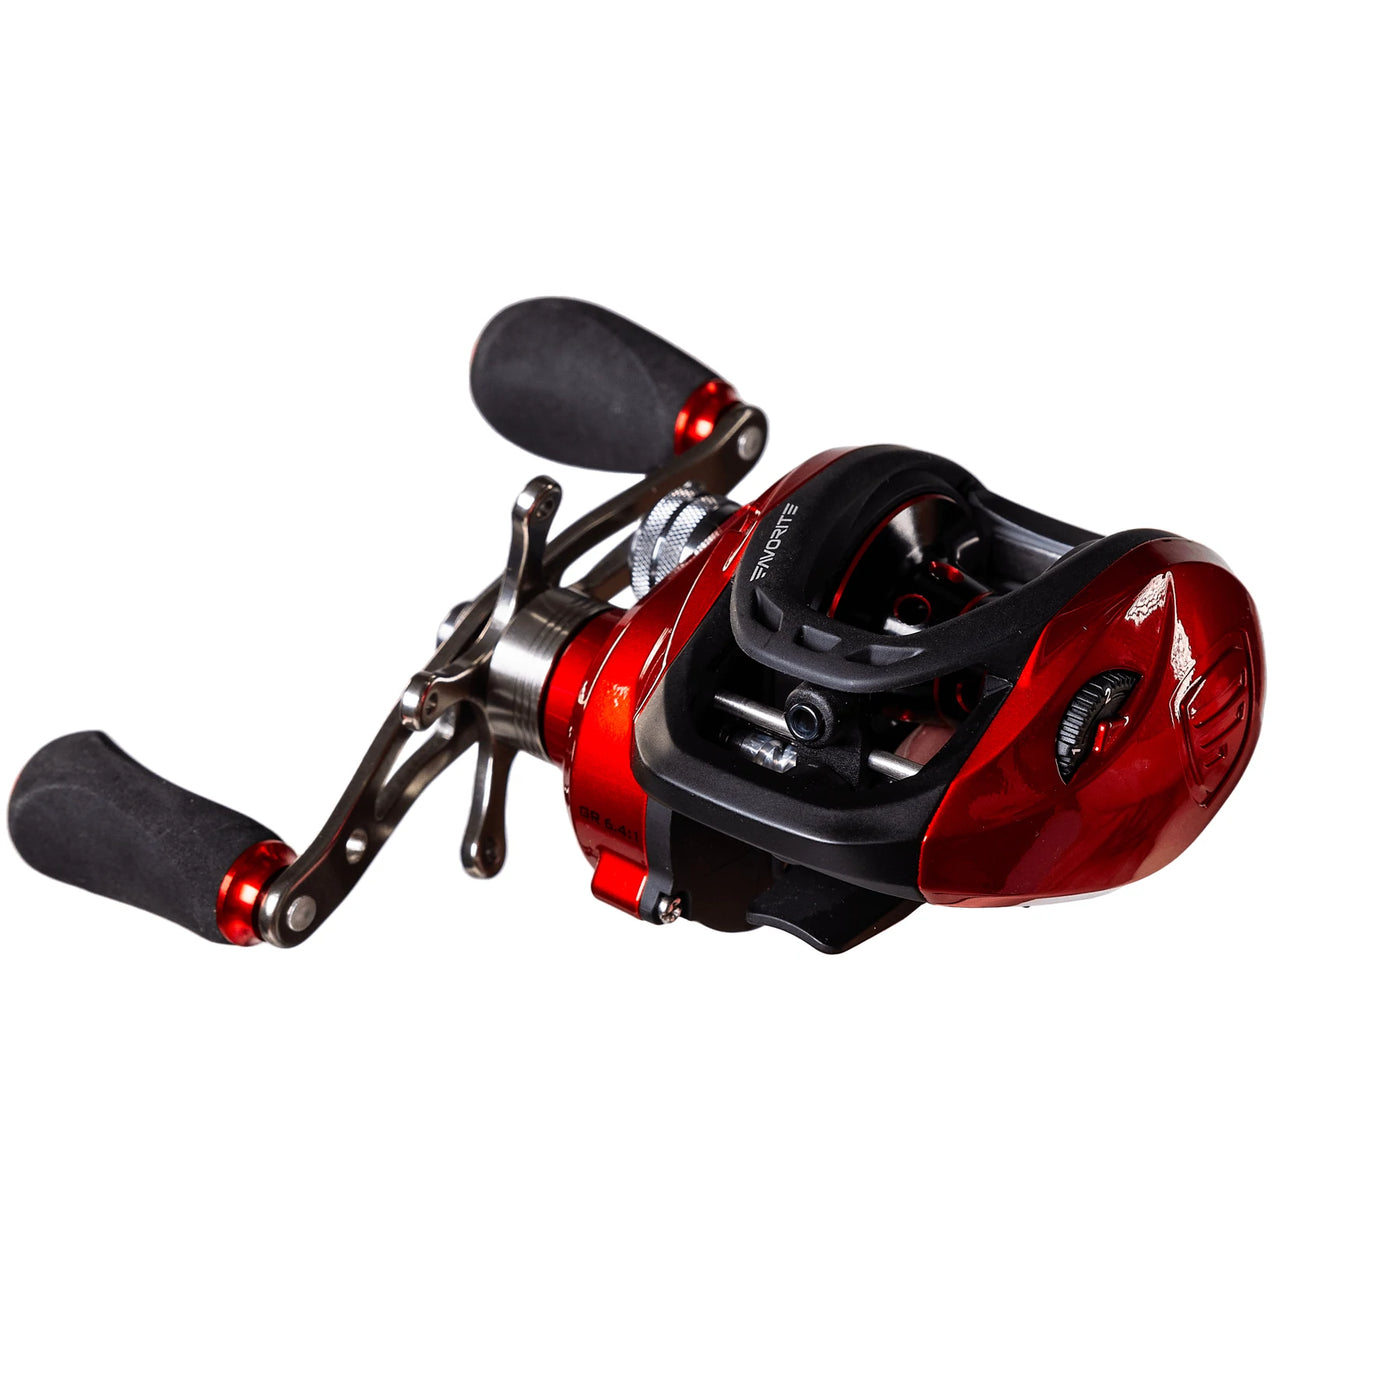 baitcast reel parts, baitcast reel parts Suppliers and Manufacturers at